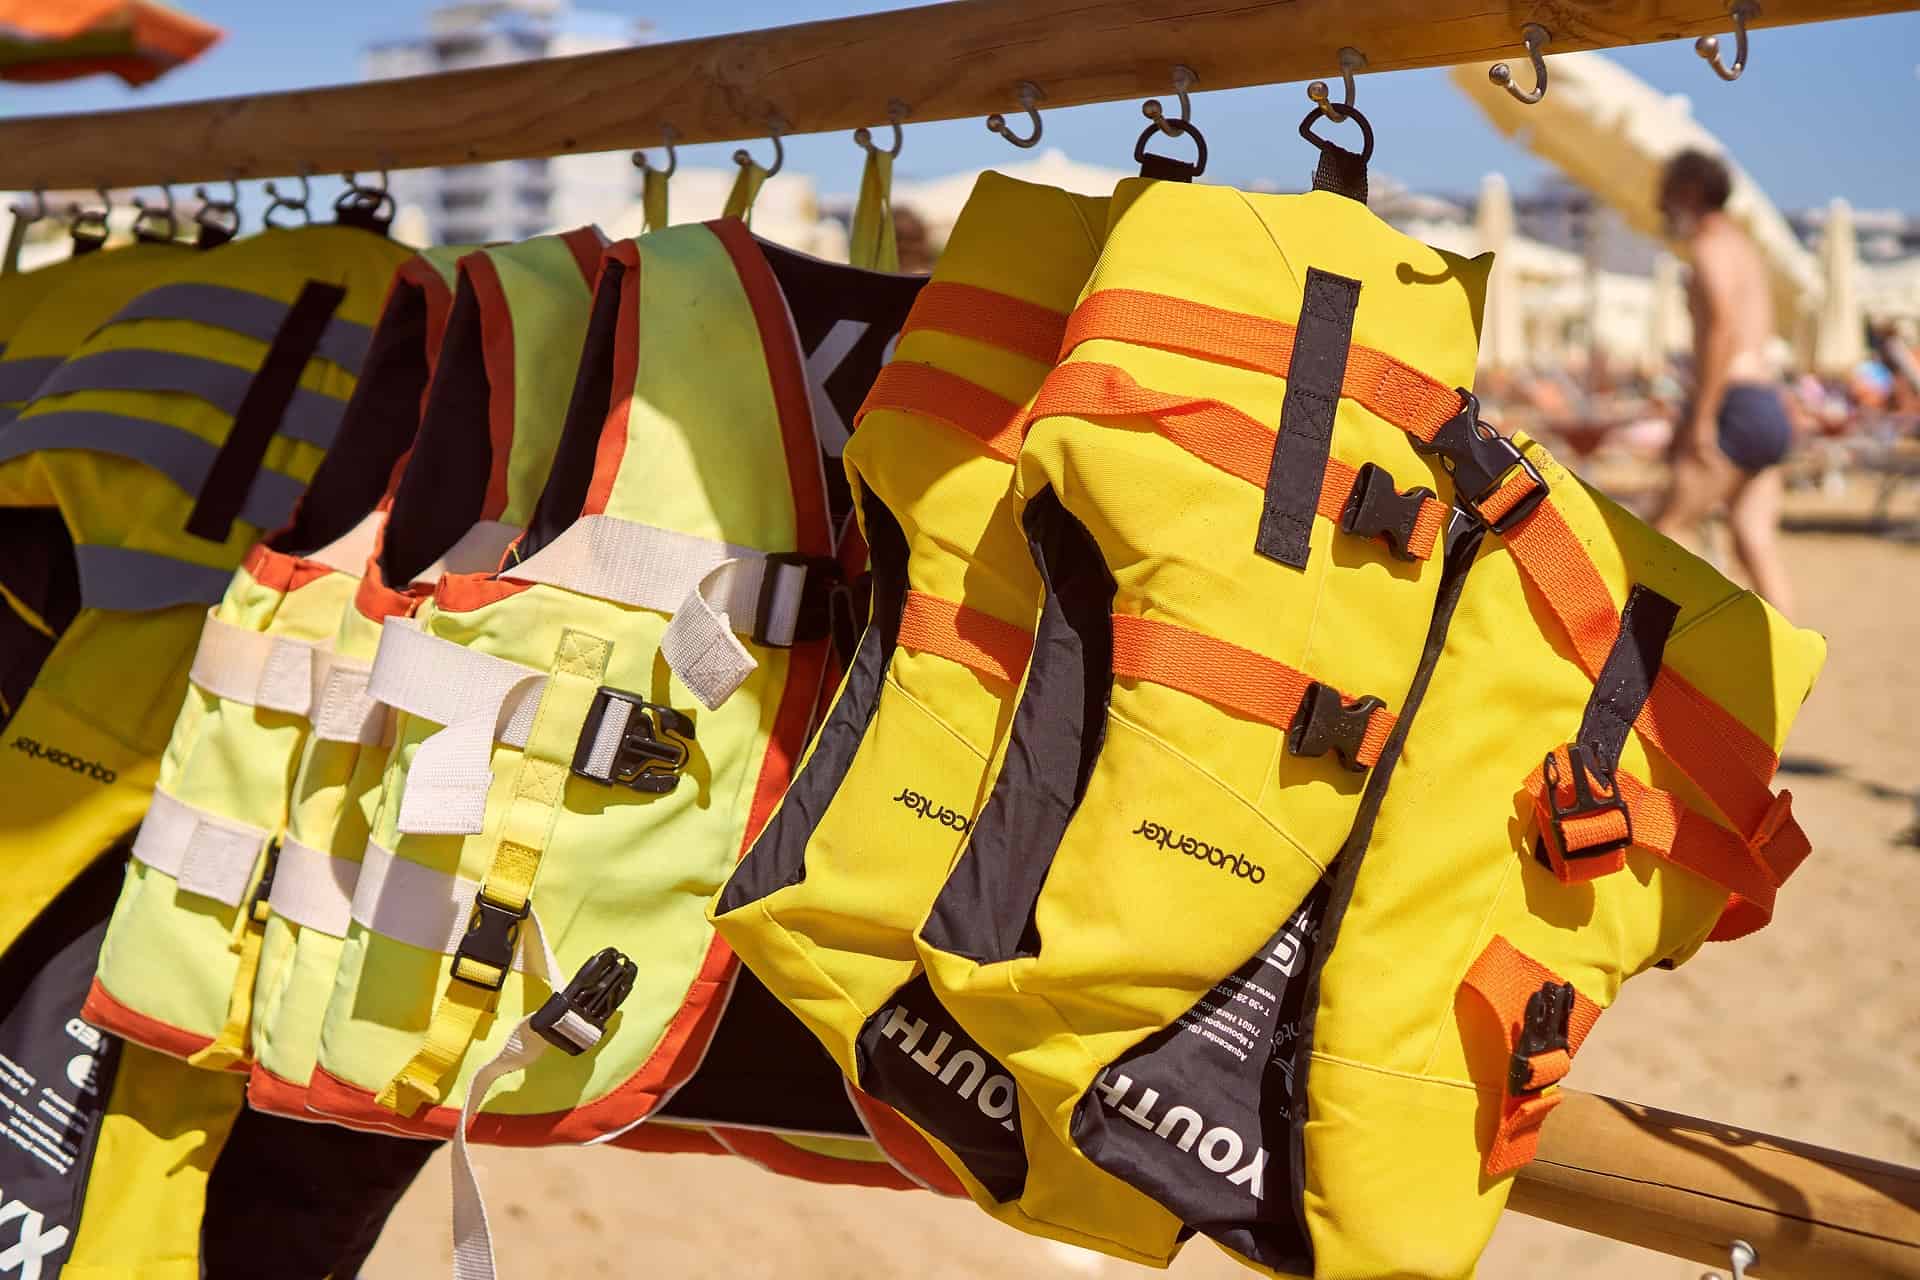 A selection of the Best Life Jackets hanging from a rail